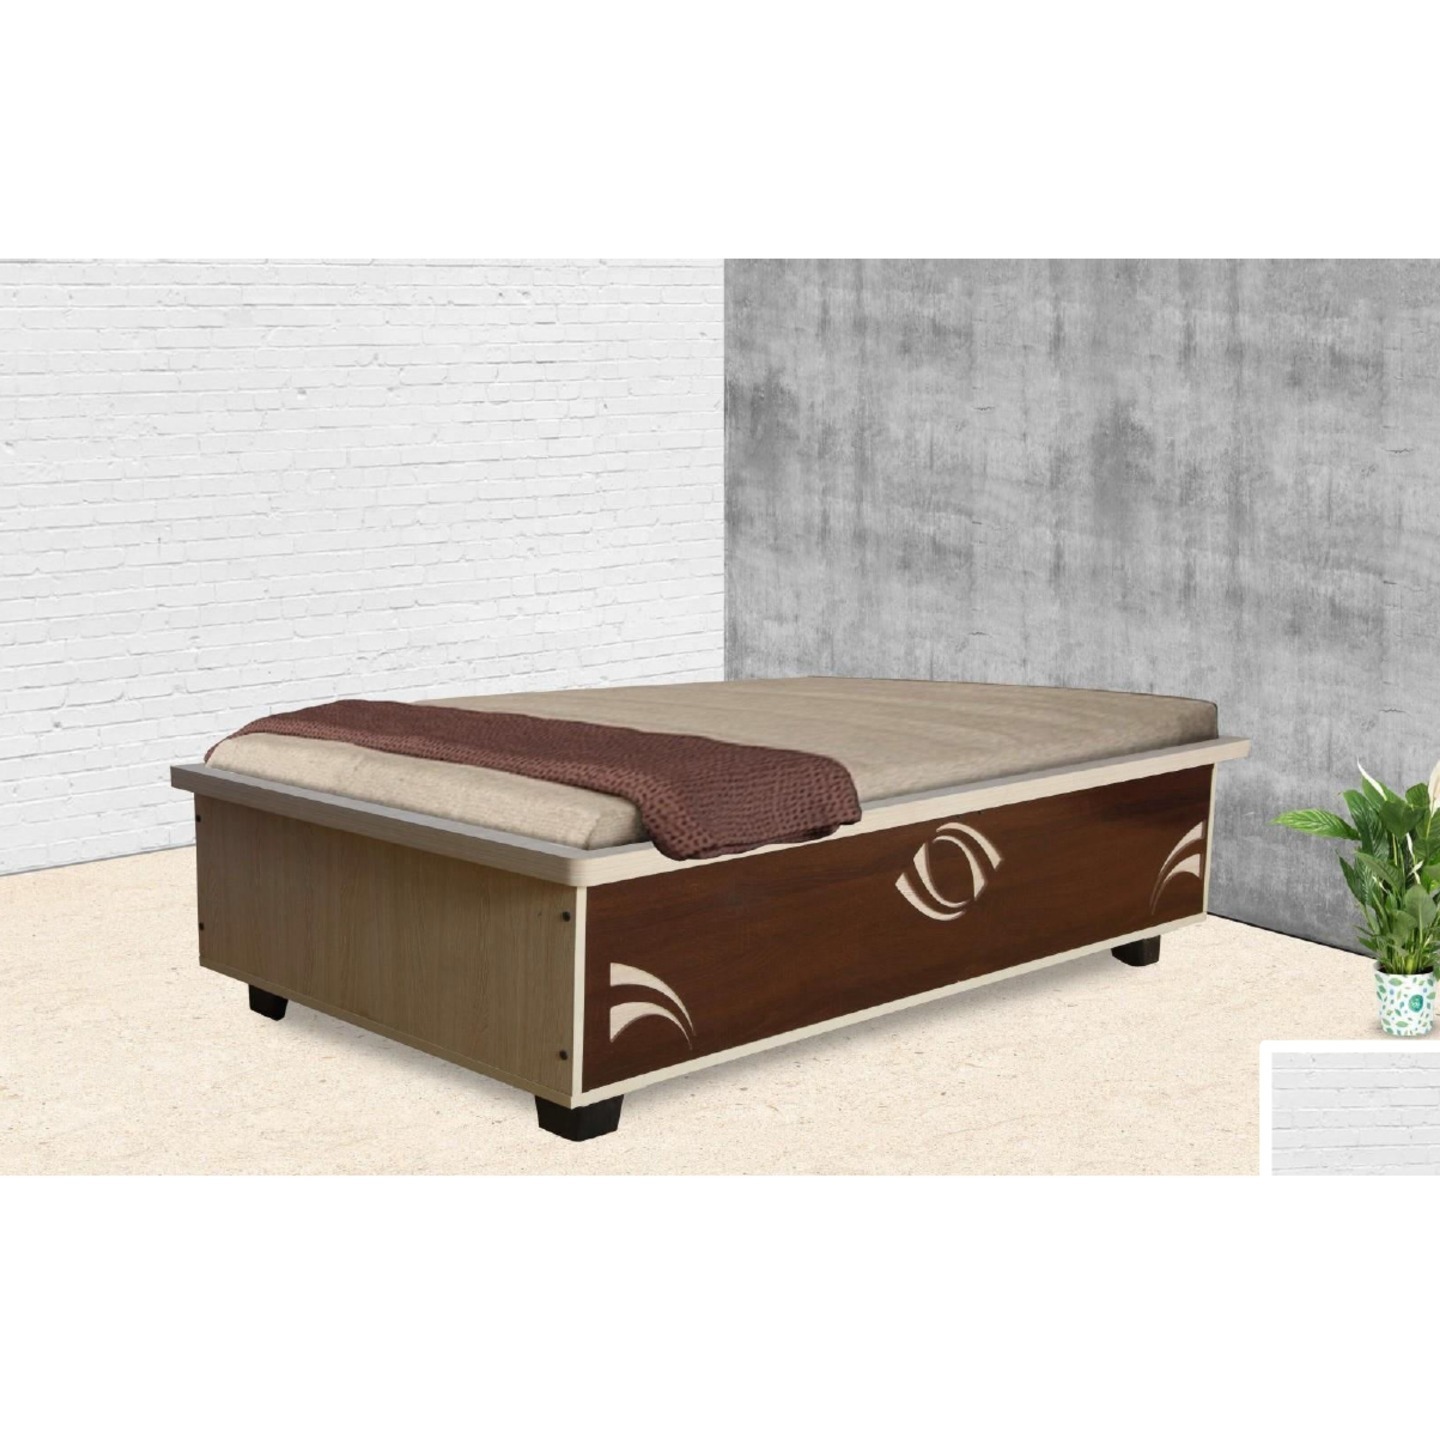 HS Single Bed Size 72"x36" Fancy In Brown Colour